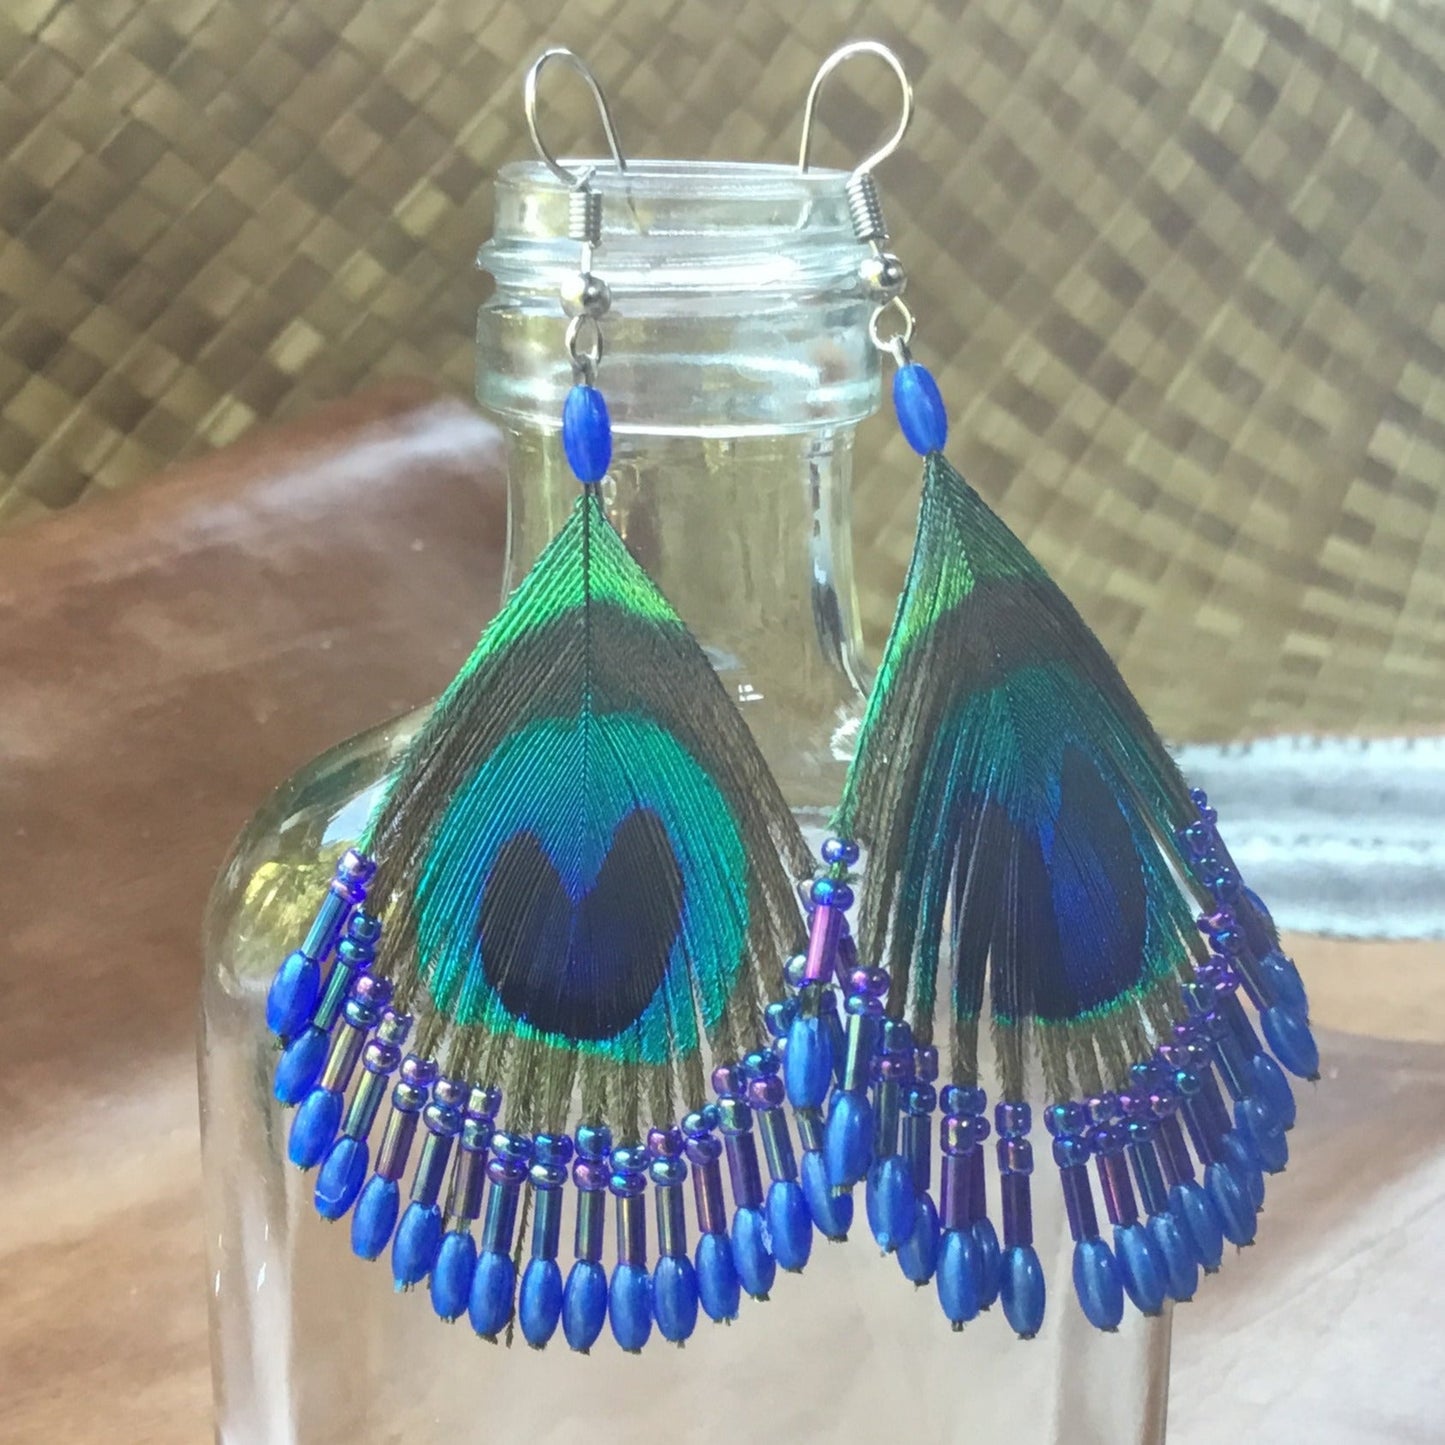 French hook peacock earrings, feather with blue beads.